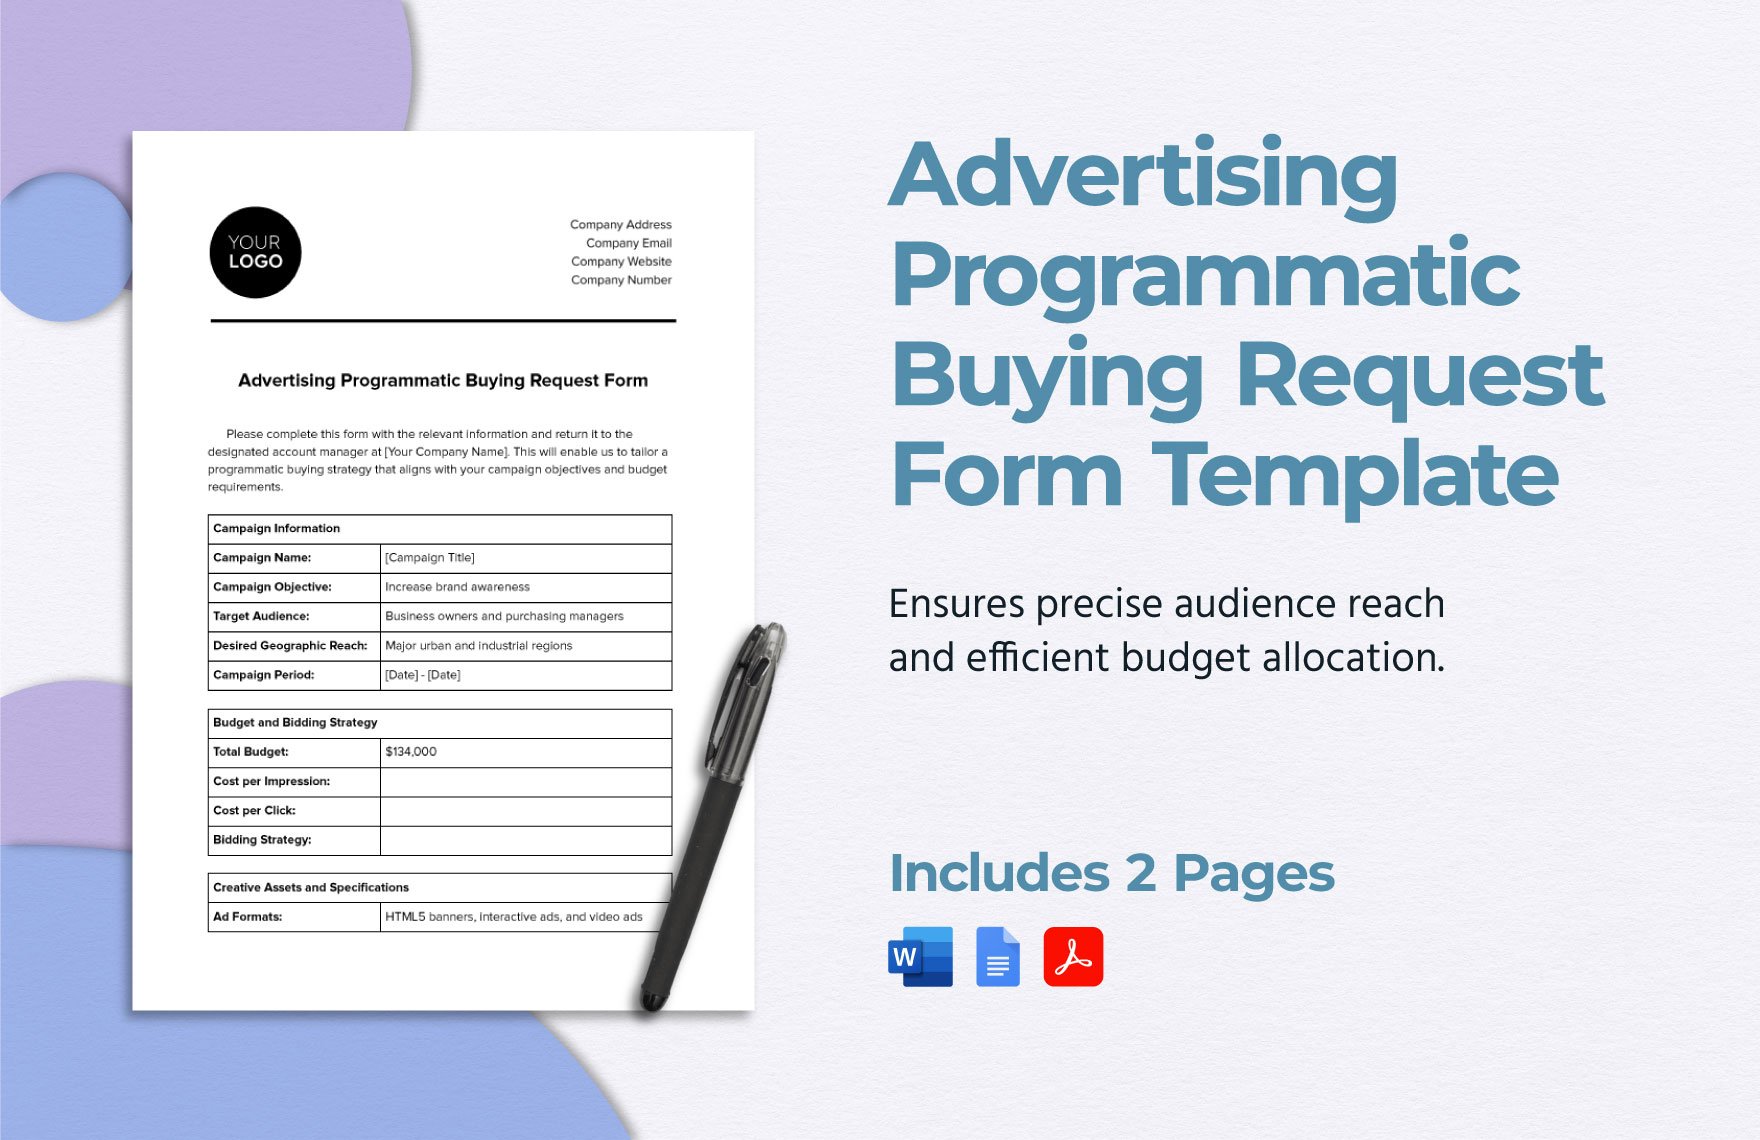 Advertising Programmatic Buying Request Form Template in Word, Google Docs, PDF